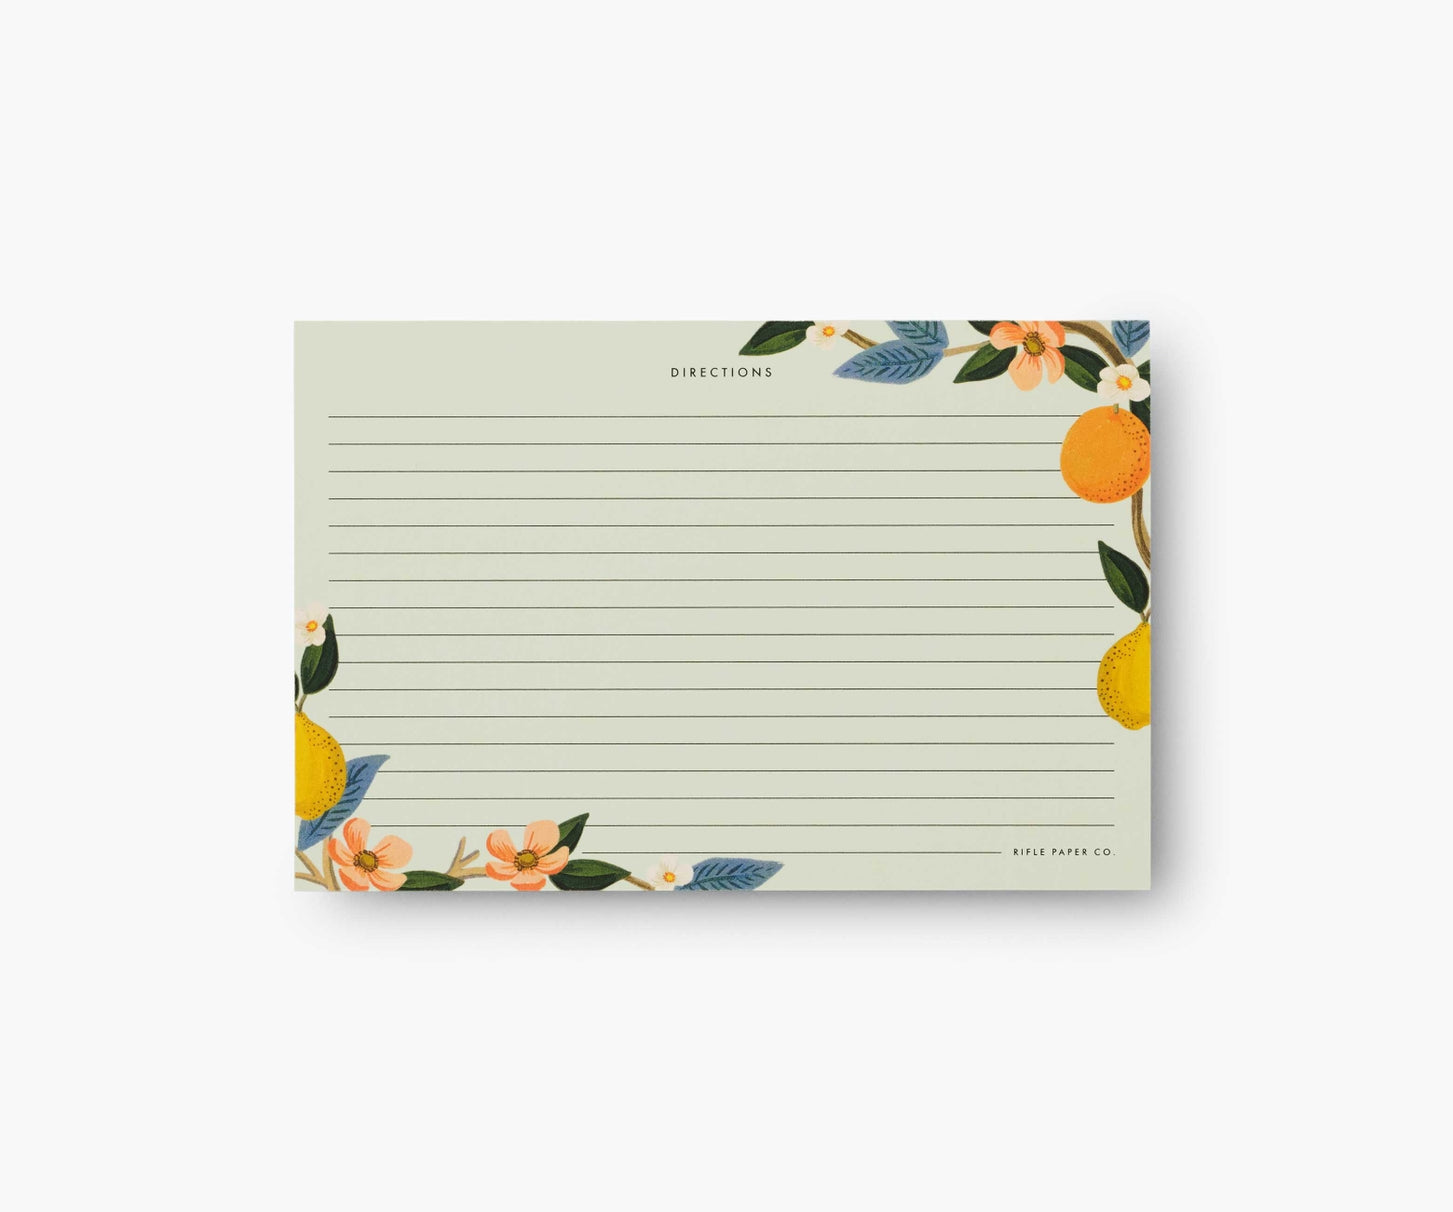 Citrus Grove Recipe Cards by Rifle Paper Co.